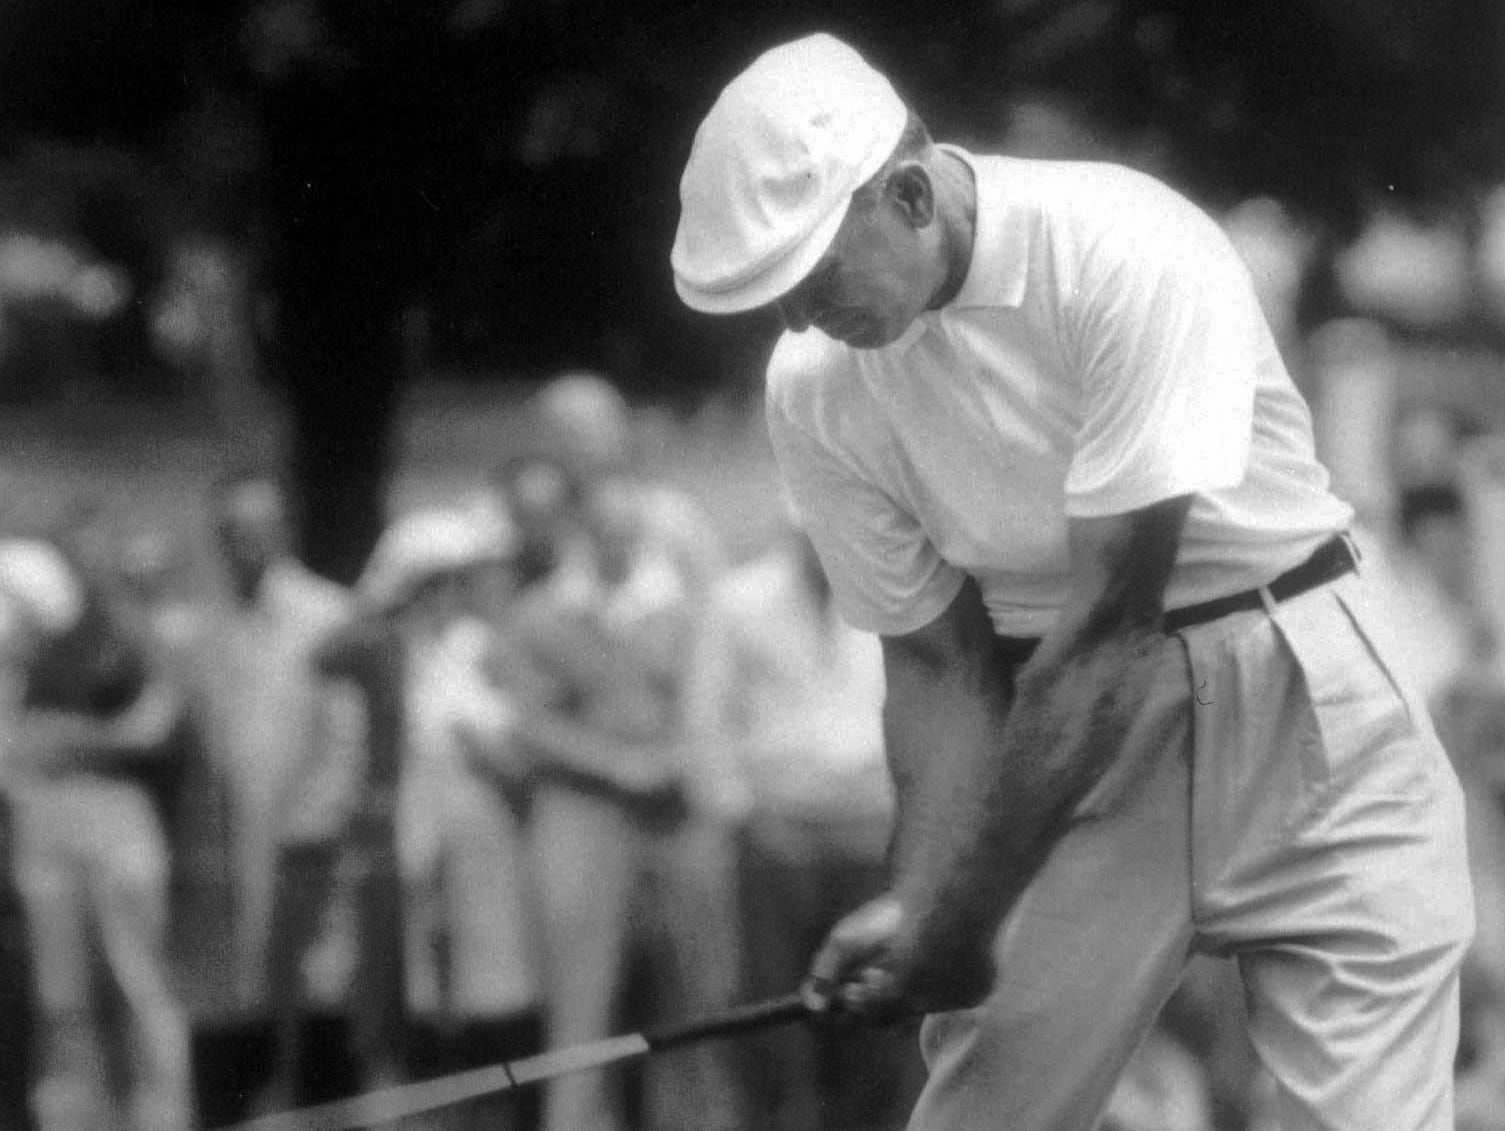 Jules Alexander went to Winged Foot during the U.S. Open in 1959 where he captured iconic images of Ben Hogan. Alexander died Friday a week after falling at home in Rye.